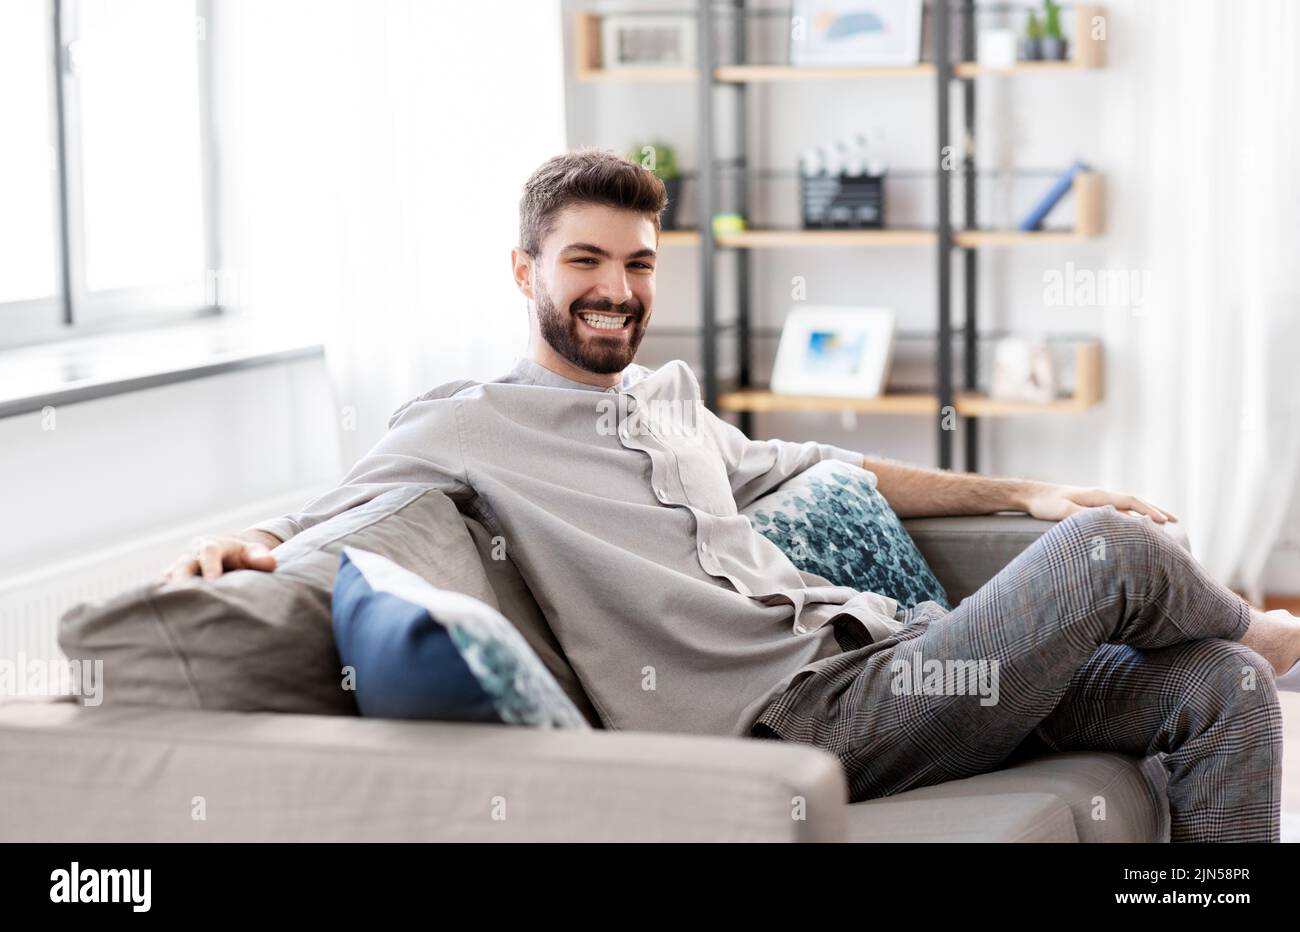 happy smiling man sitting on sofa at home Stock Photo